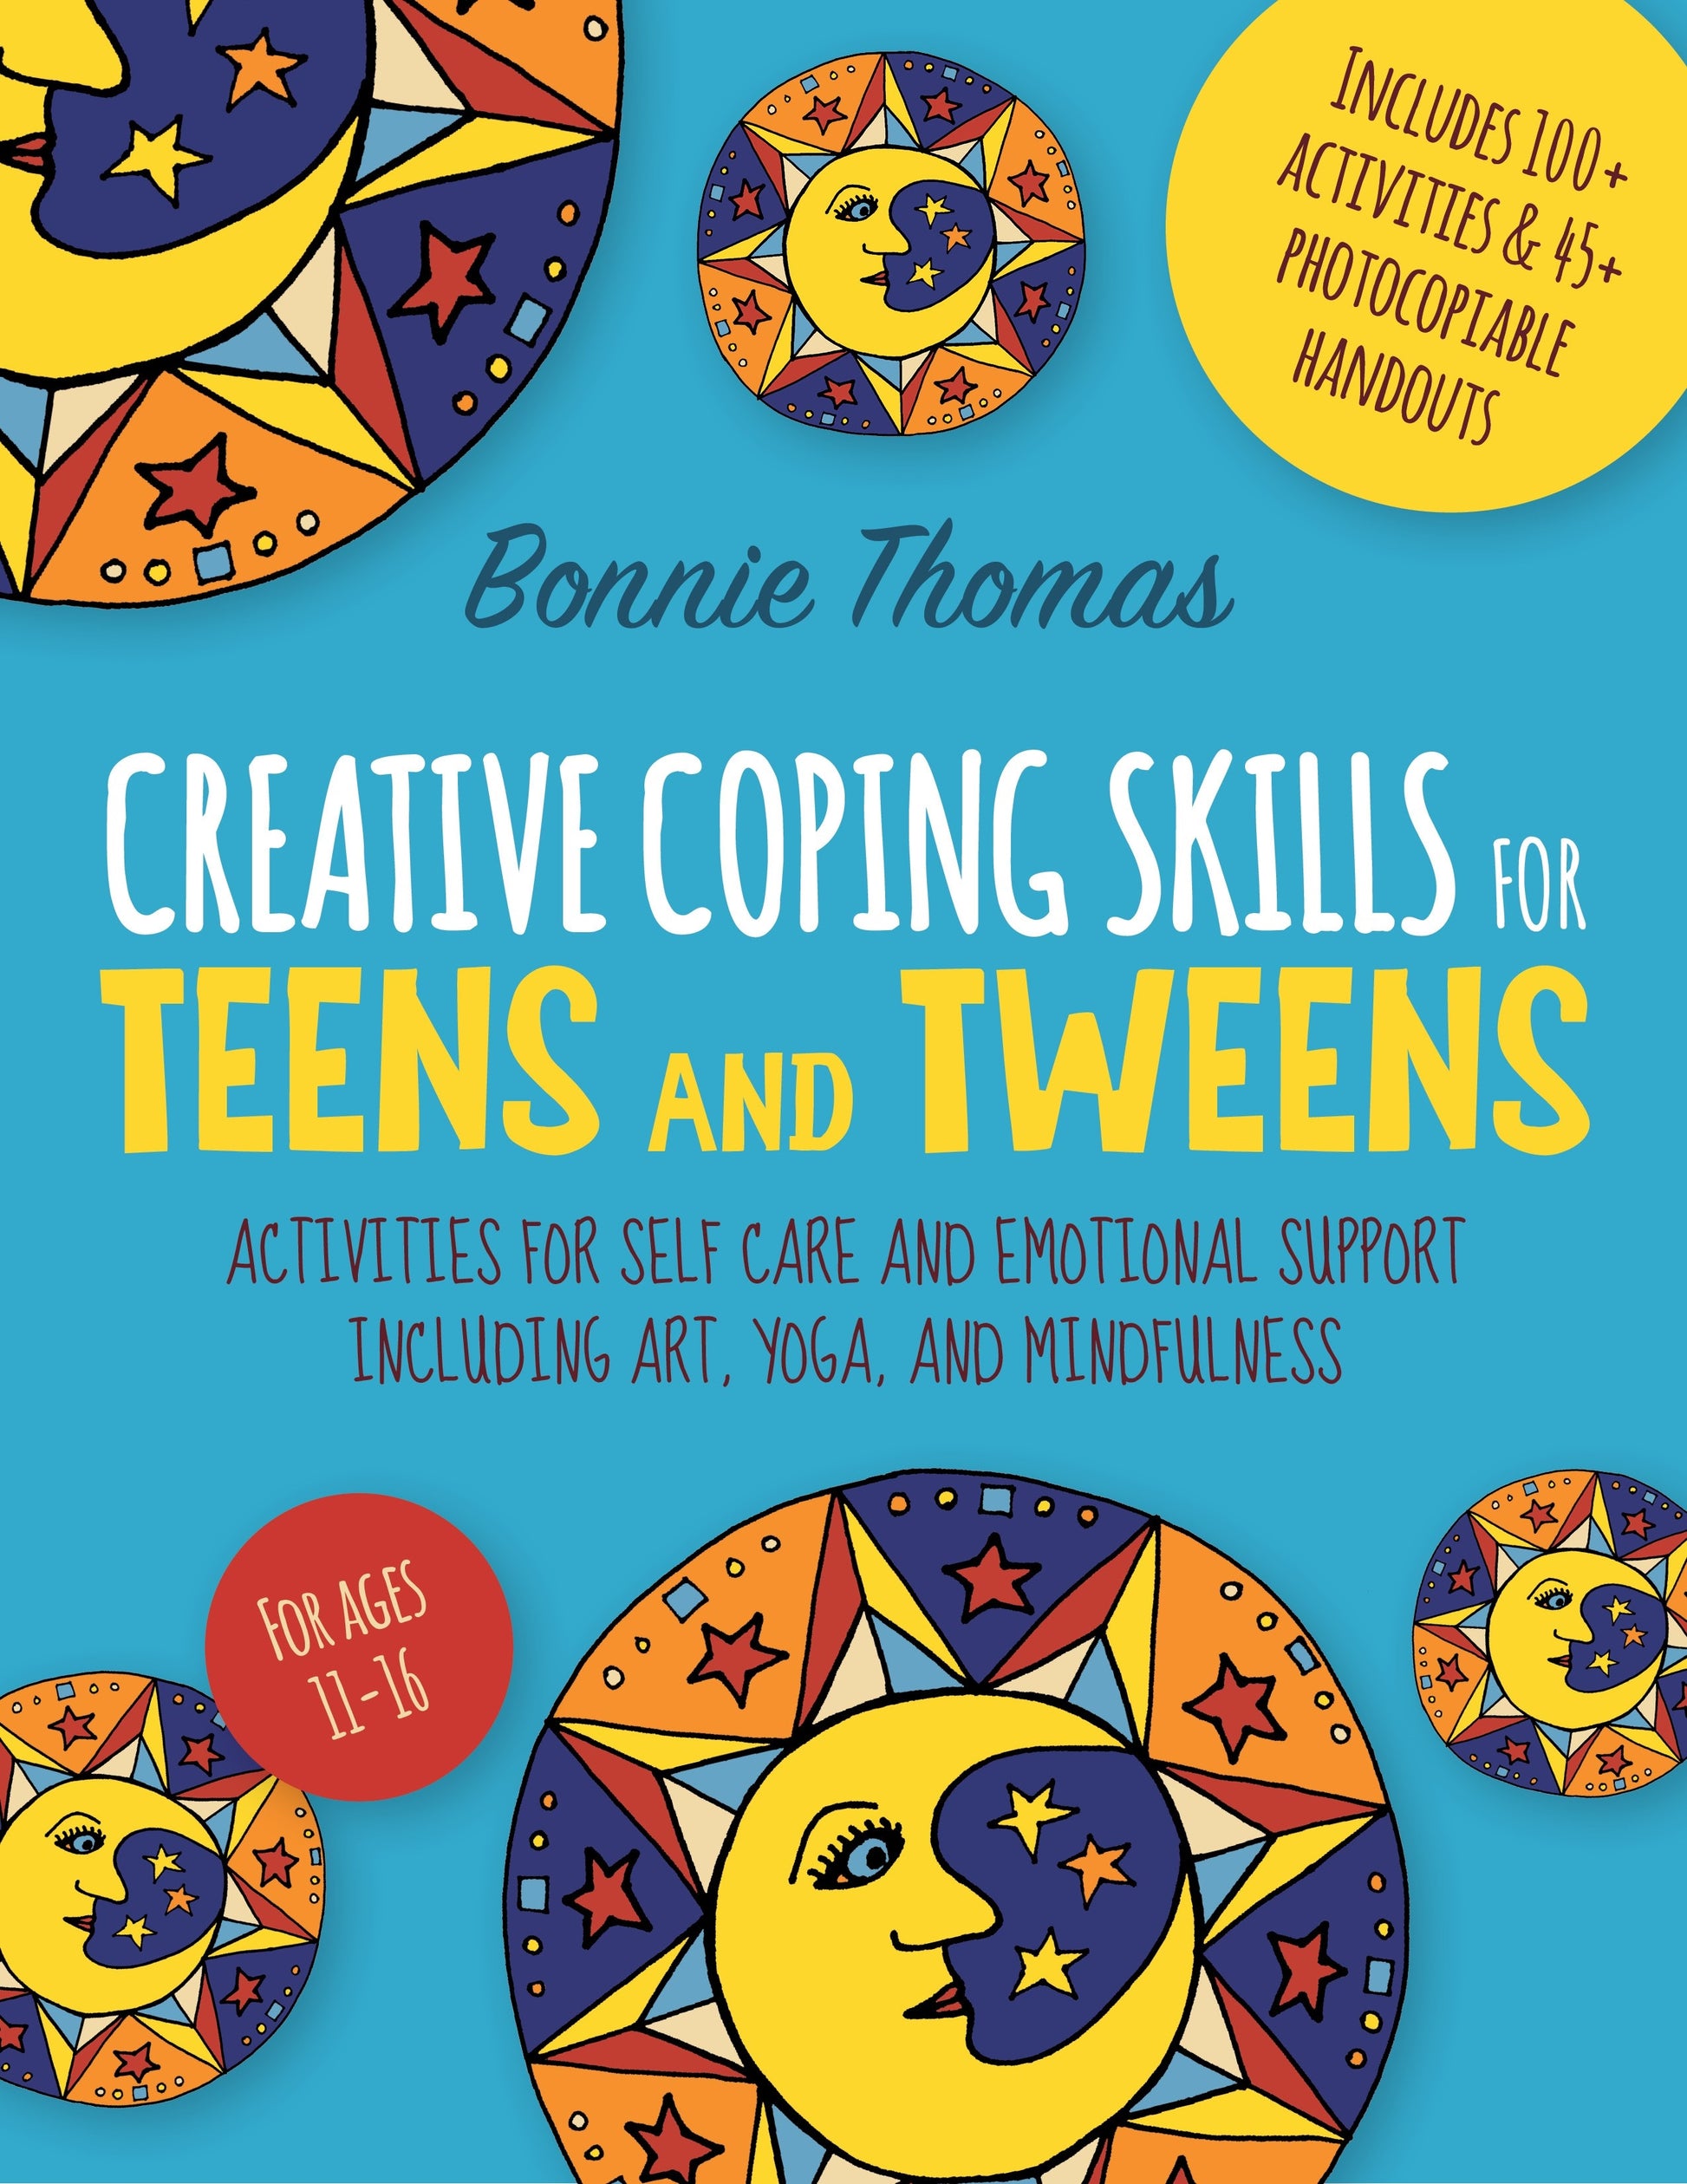 Creative Coping Skills for Teens and Tweens by Bonnie Thomas